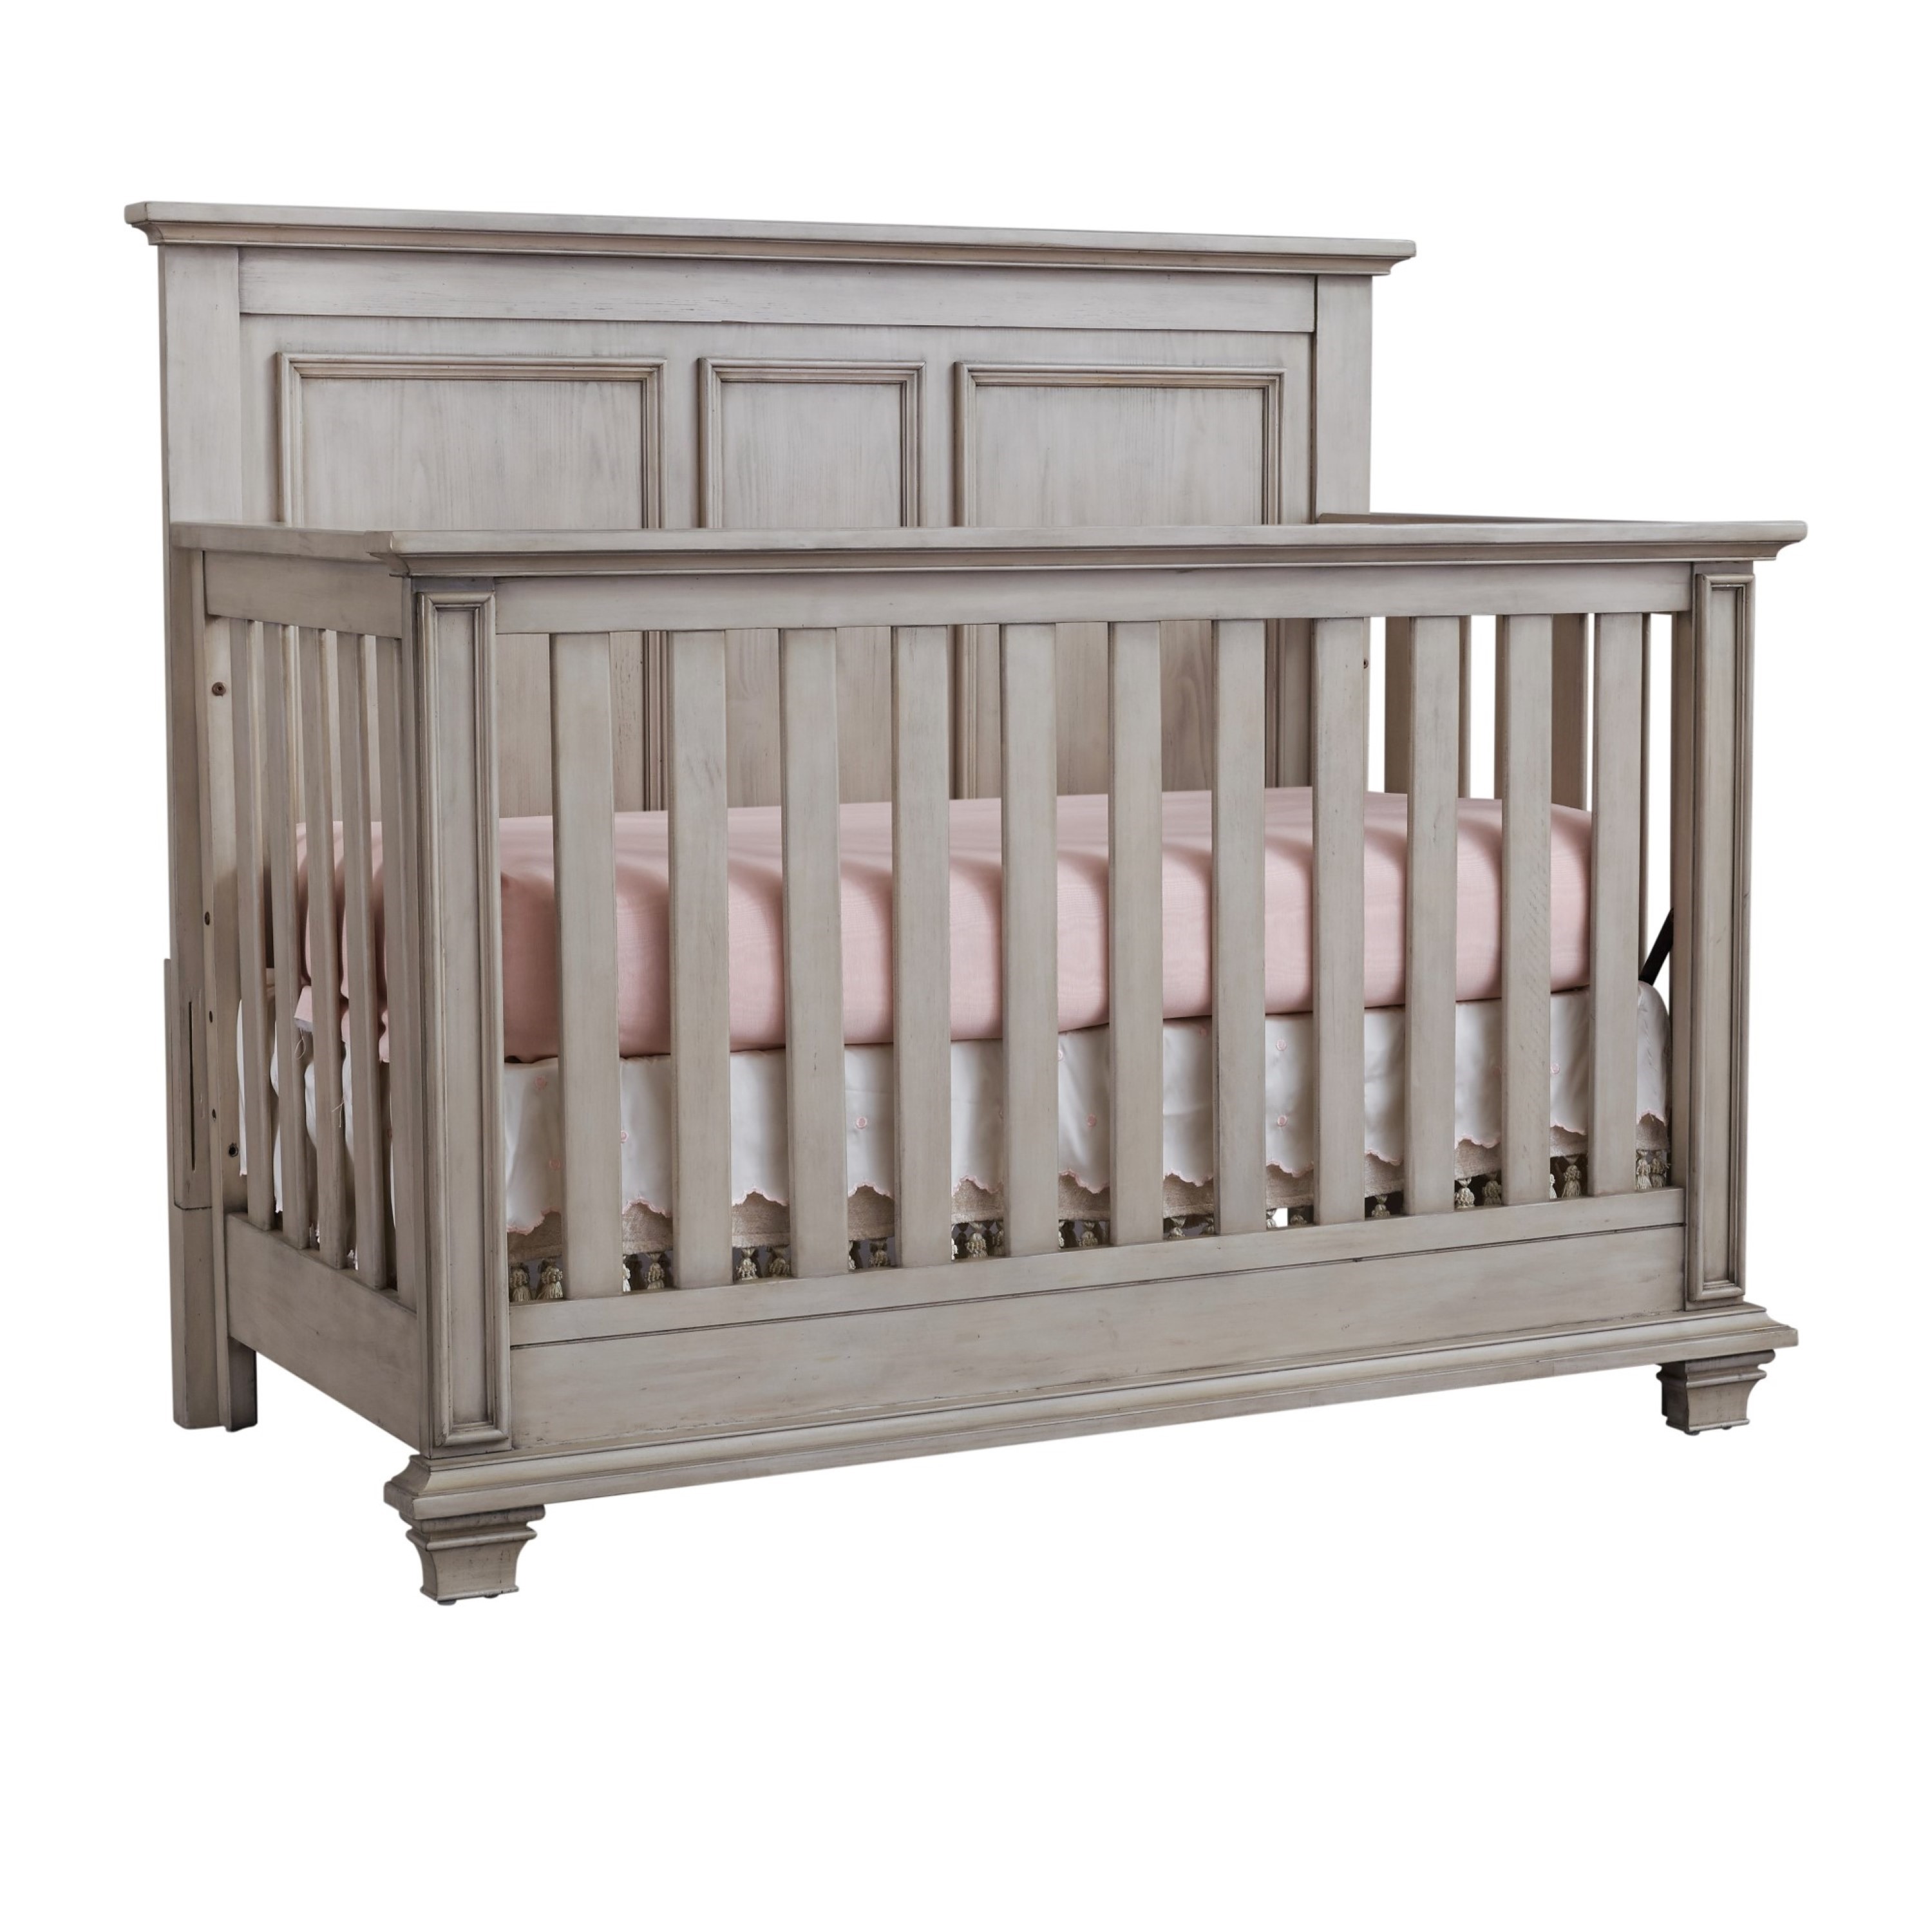 Oxford Baby Kenilworth 4-in-1 Convertible Crib, Stone Wash, GREENGUARD Gold Certified, Wooden Crib - image 1 of 10